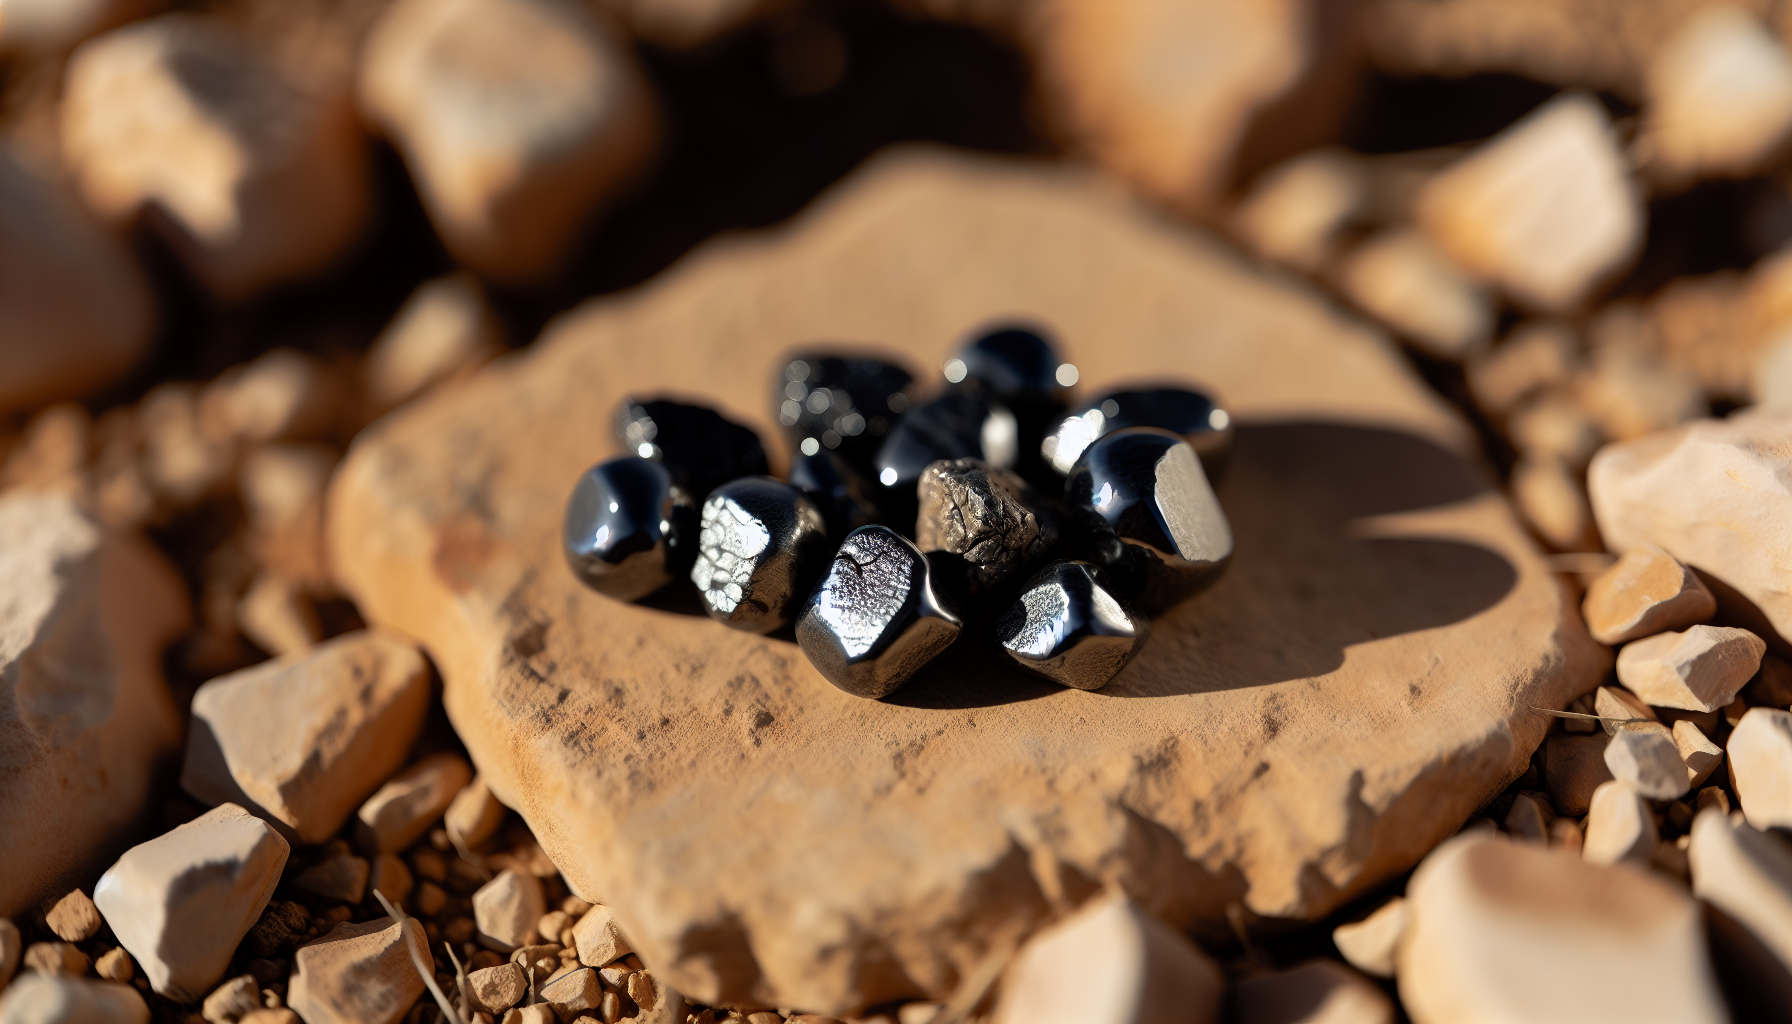 Hematite stones on a dry surface